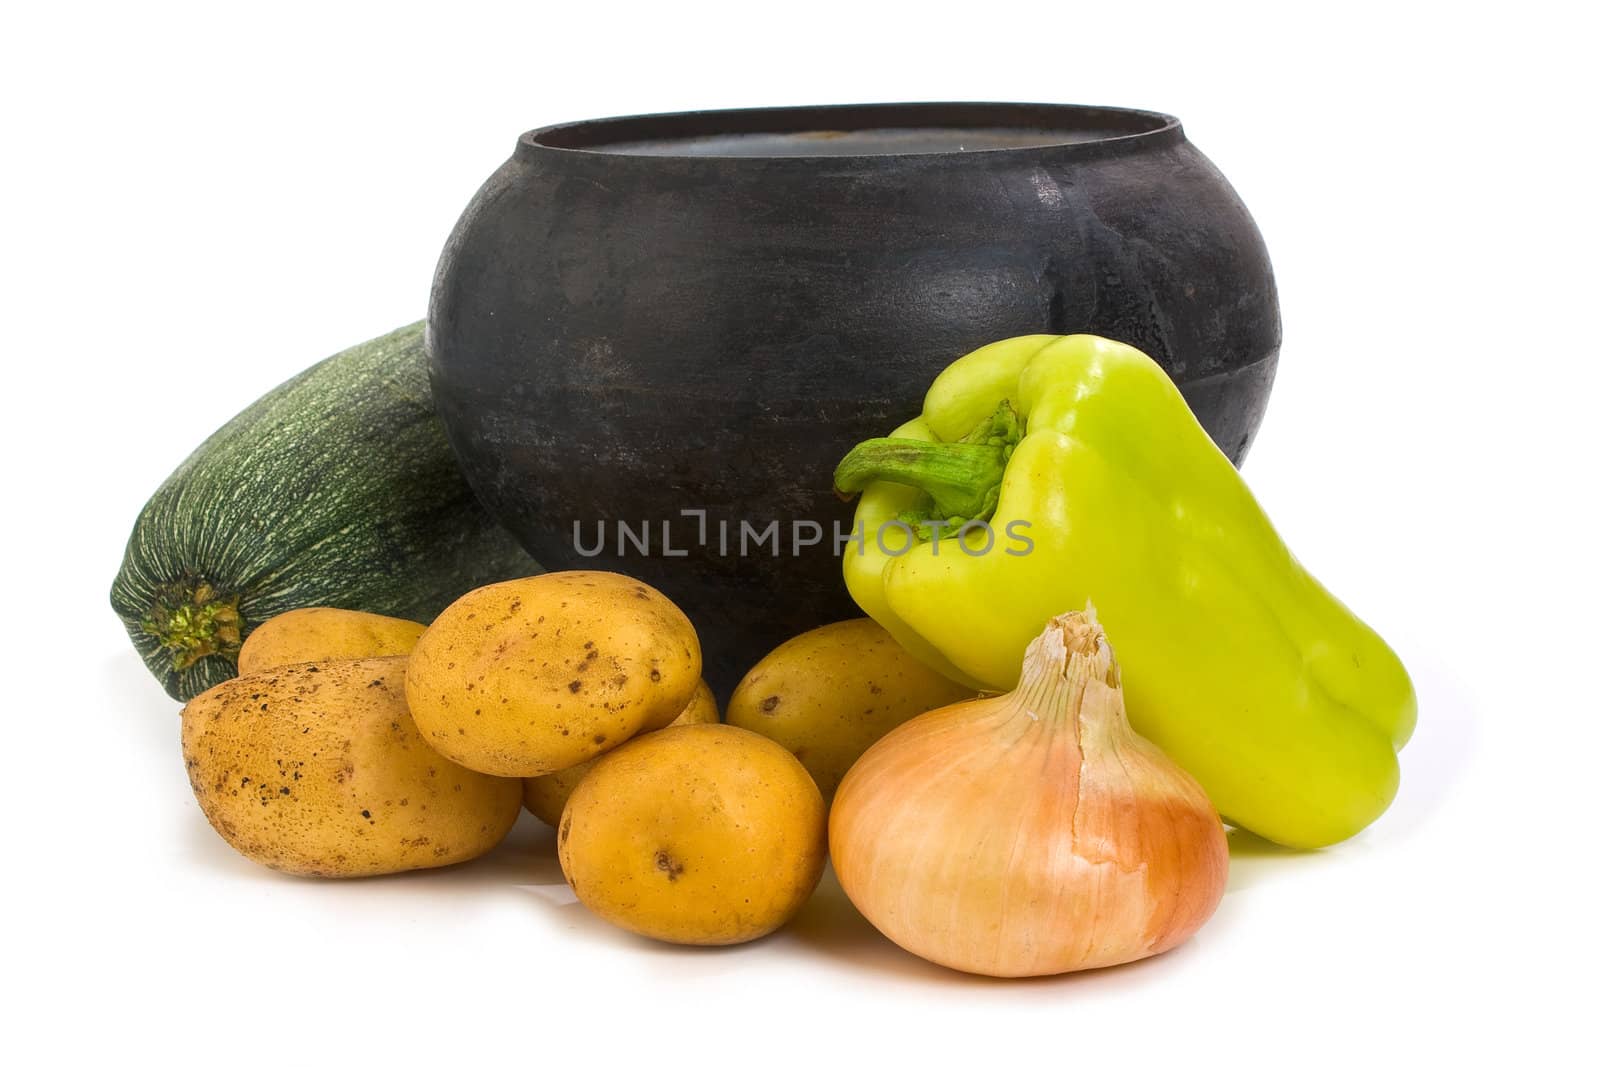 cast iron pot and vegetables by oleg_zhukov